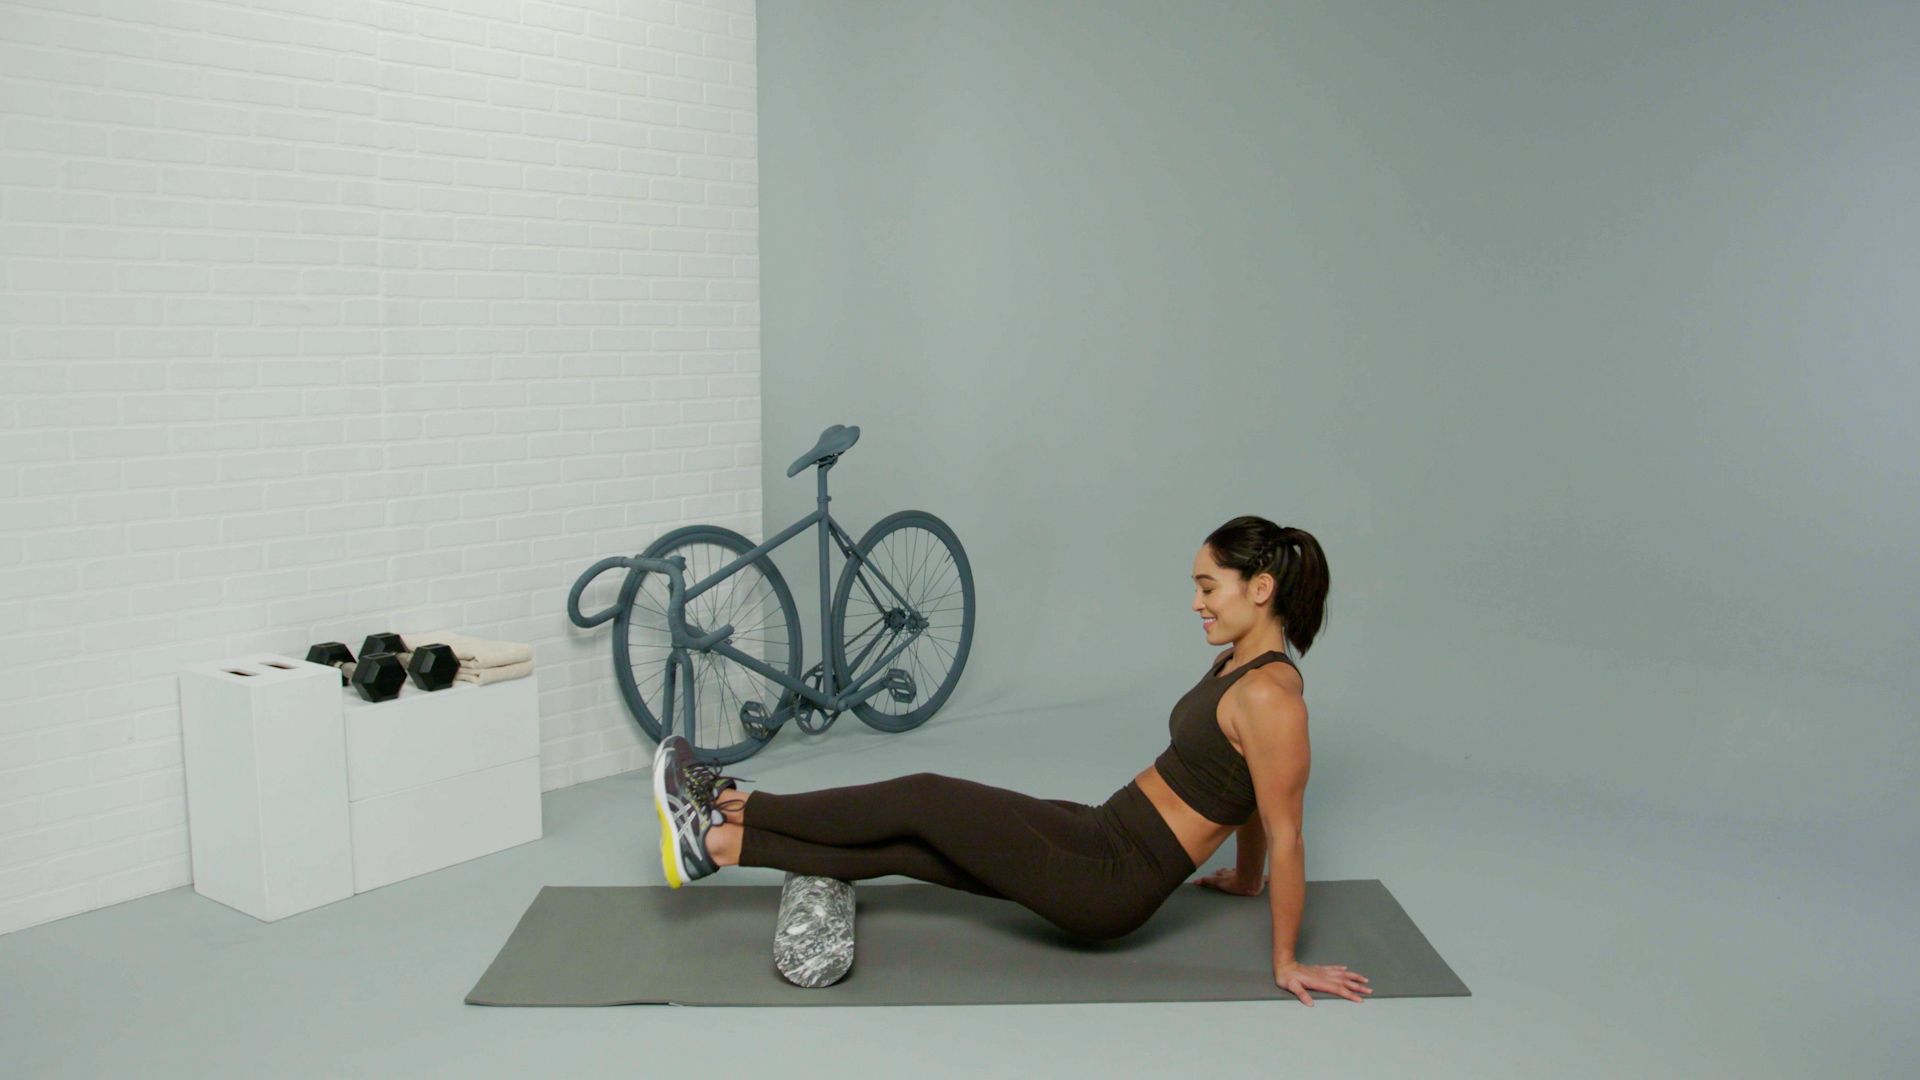 how to use a foam roller, calves